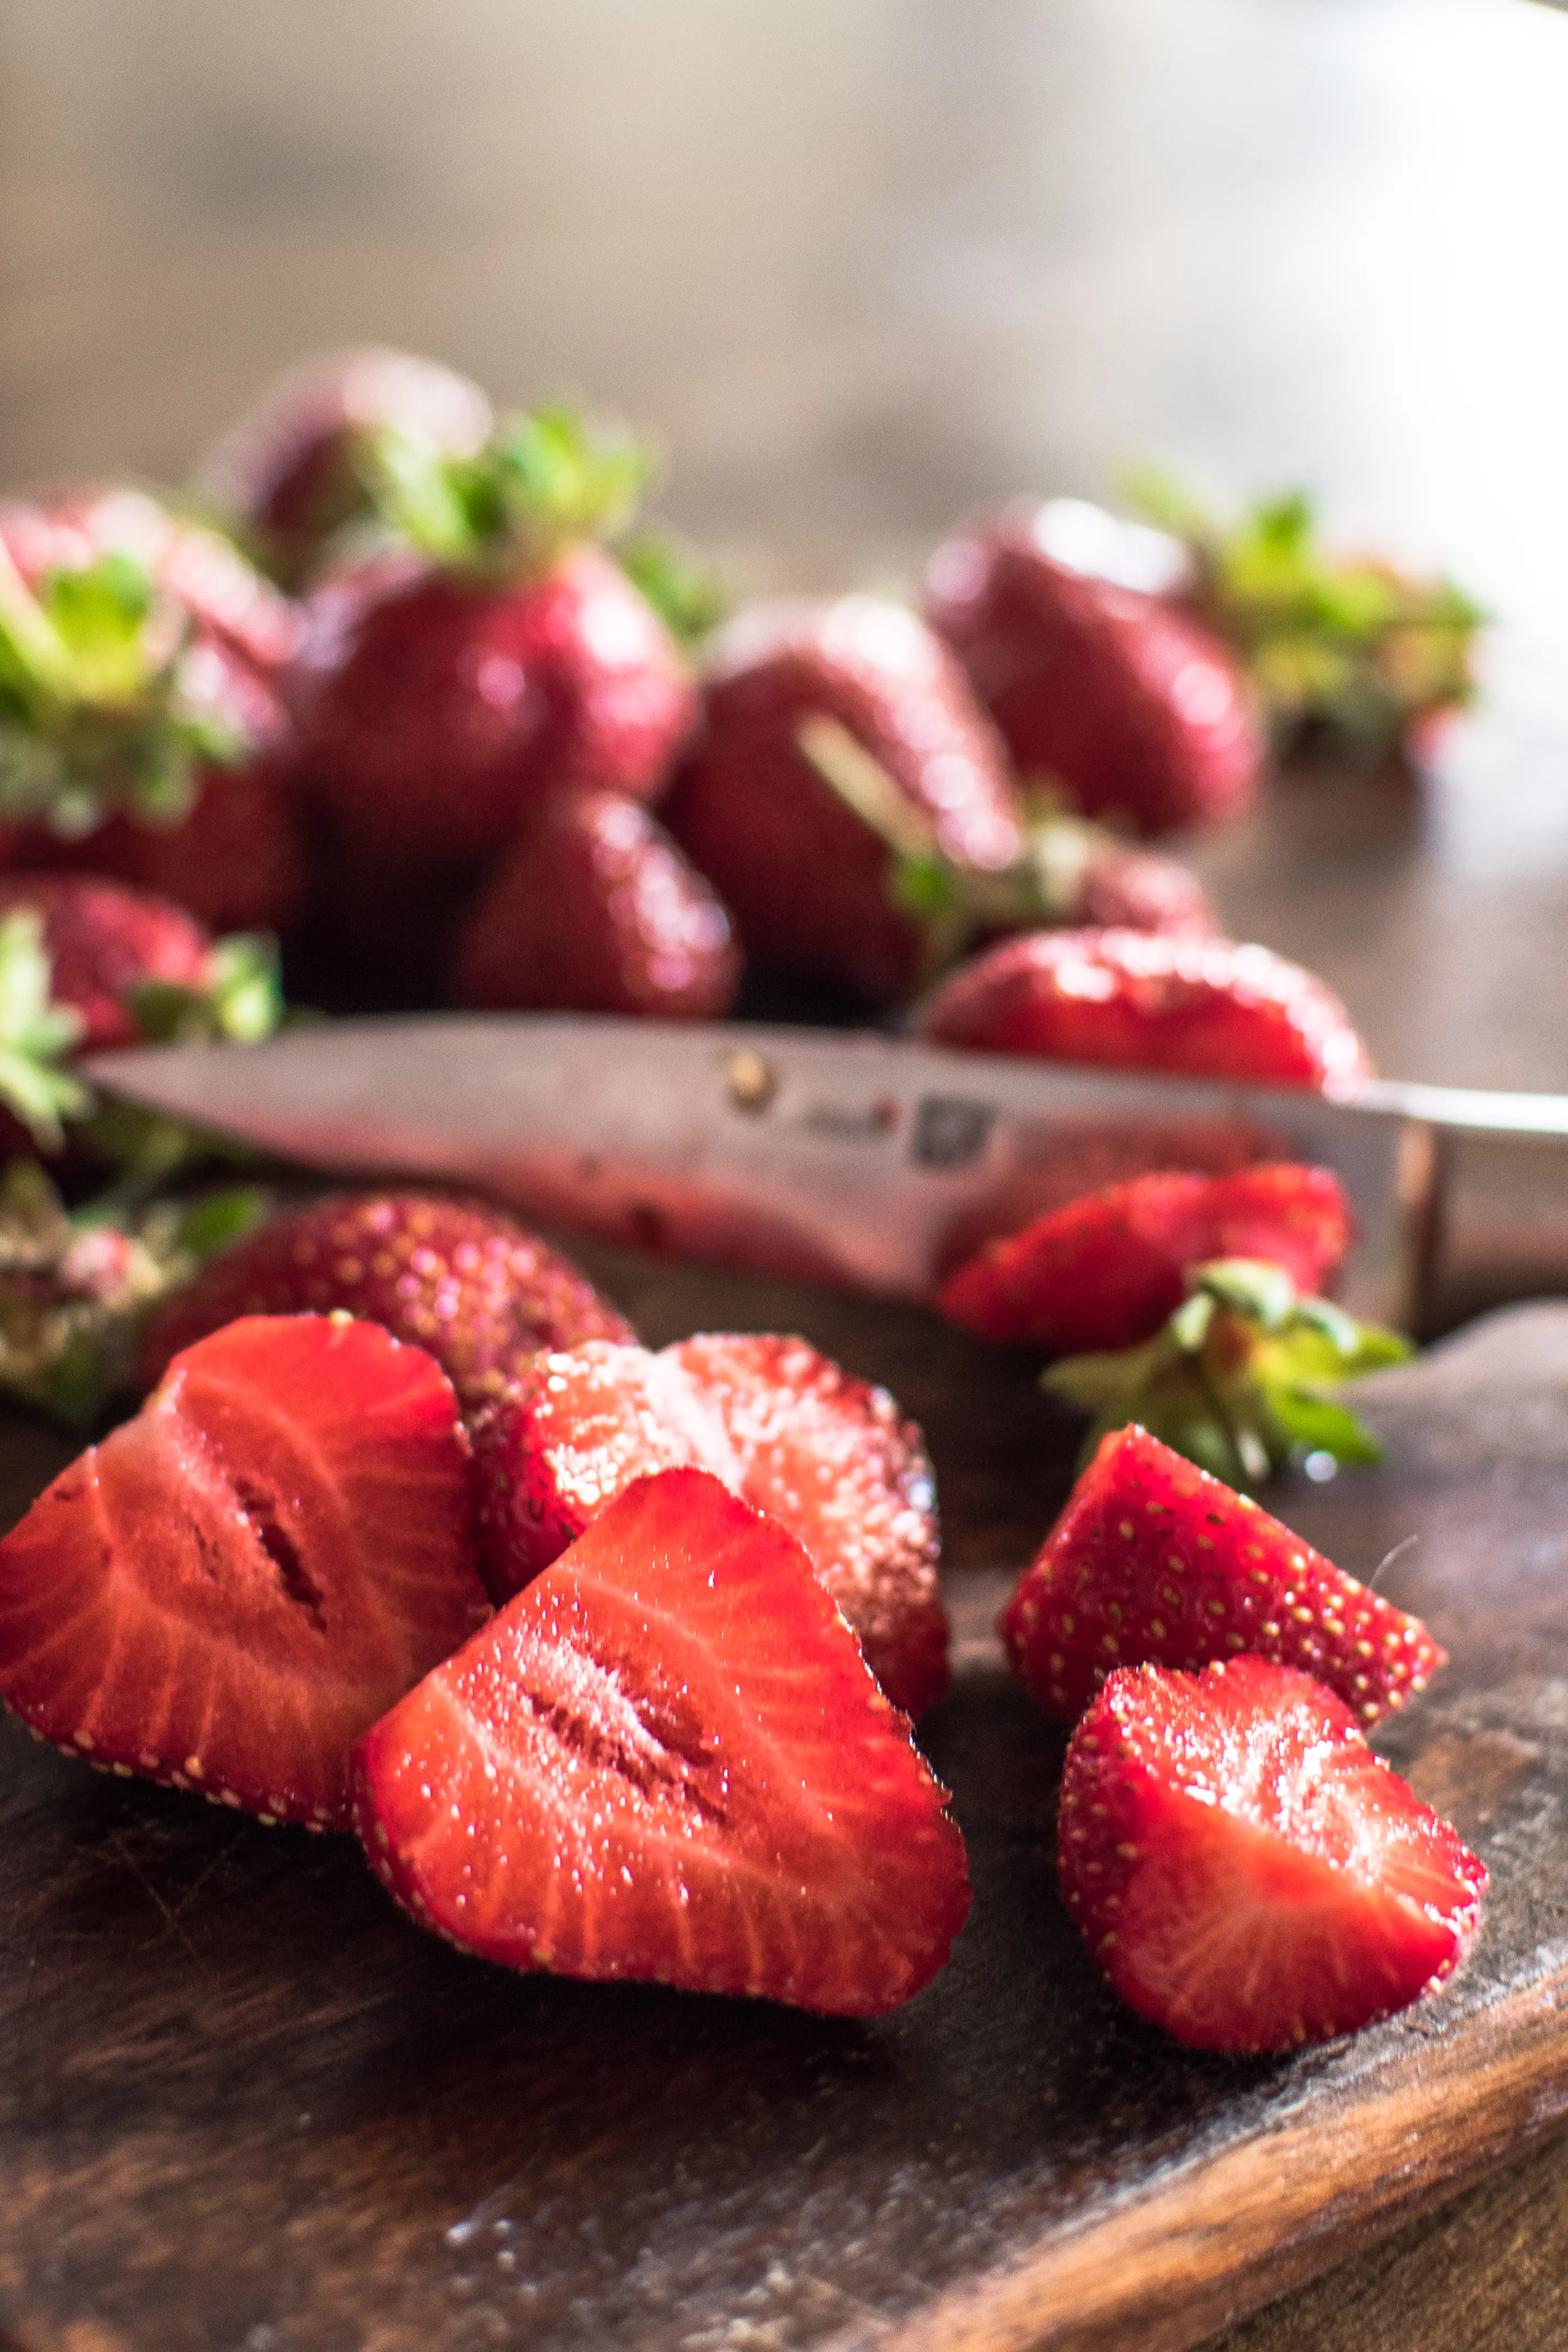 a close up shot of ripe sliced strawberries on a wooden cutting board